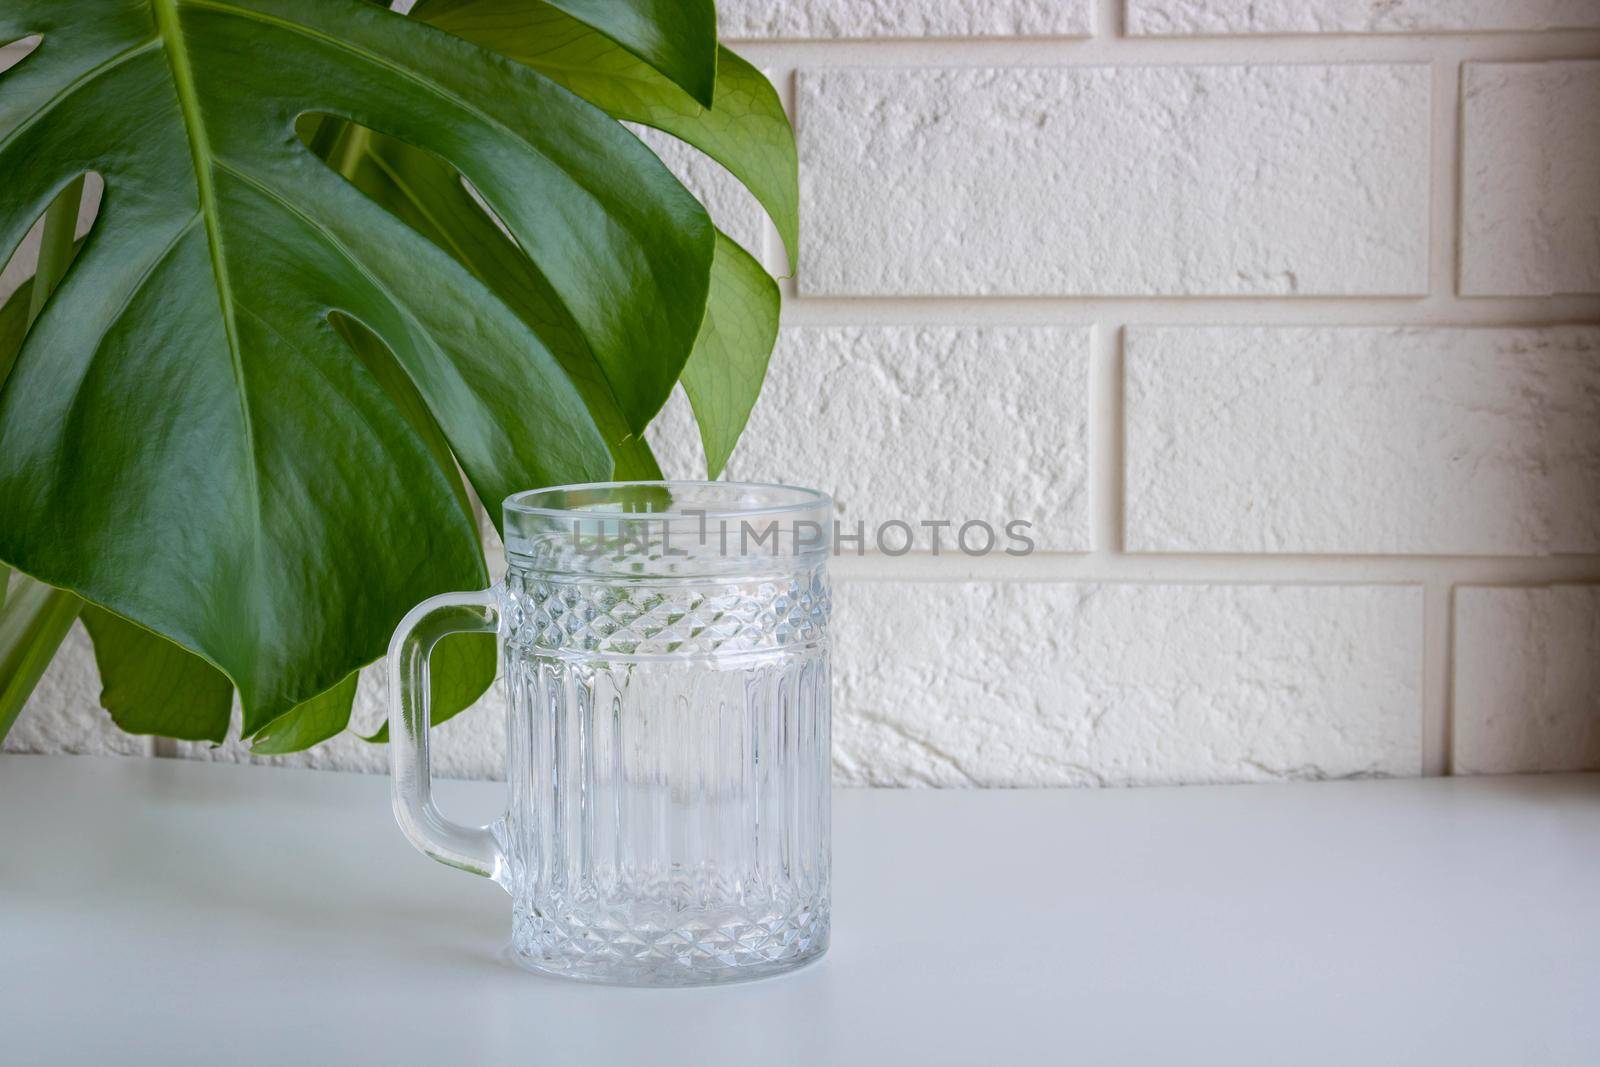 Leaves of Monstera, in front of a white brick wall next to a glass mug.